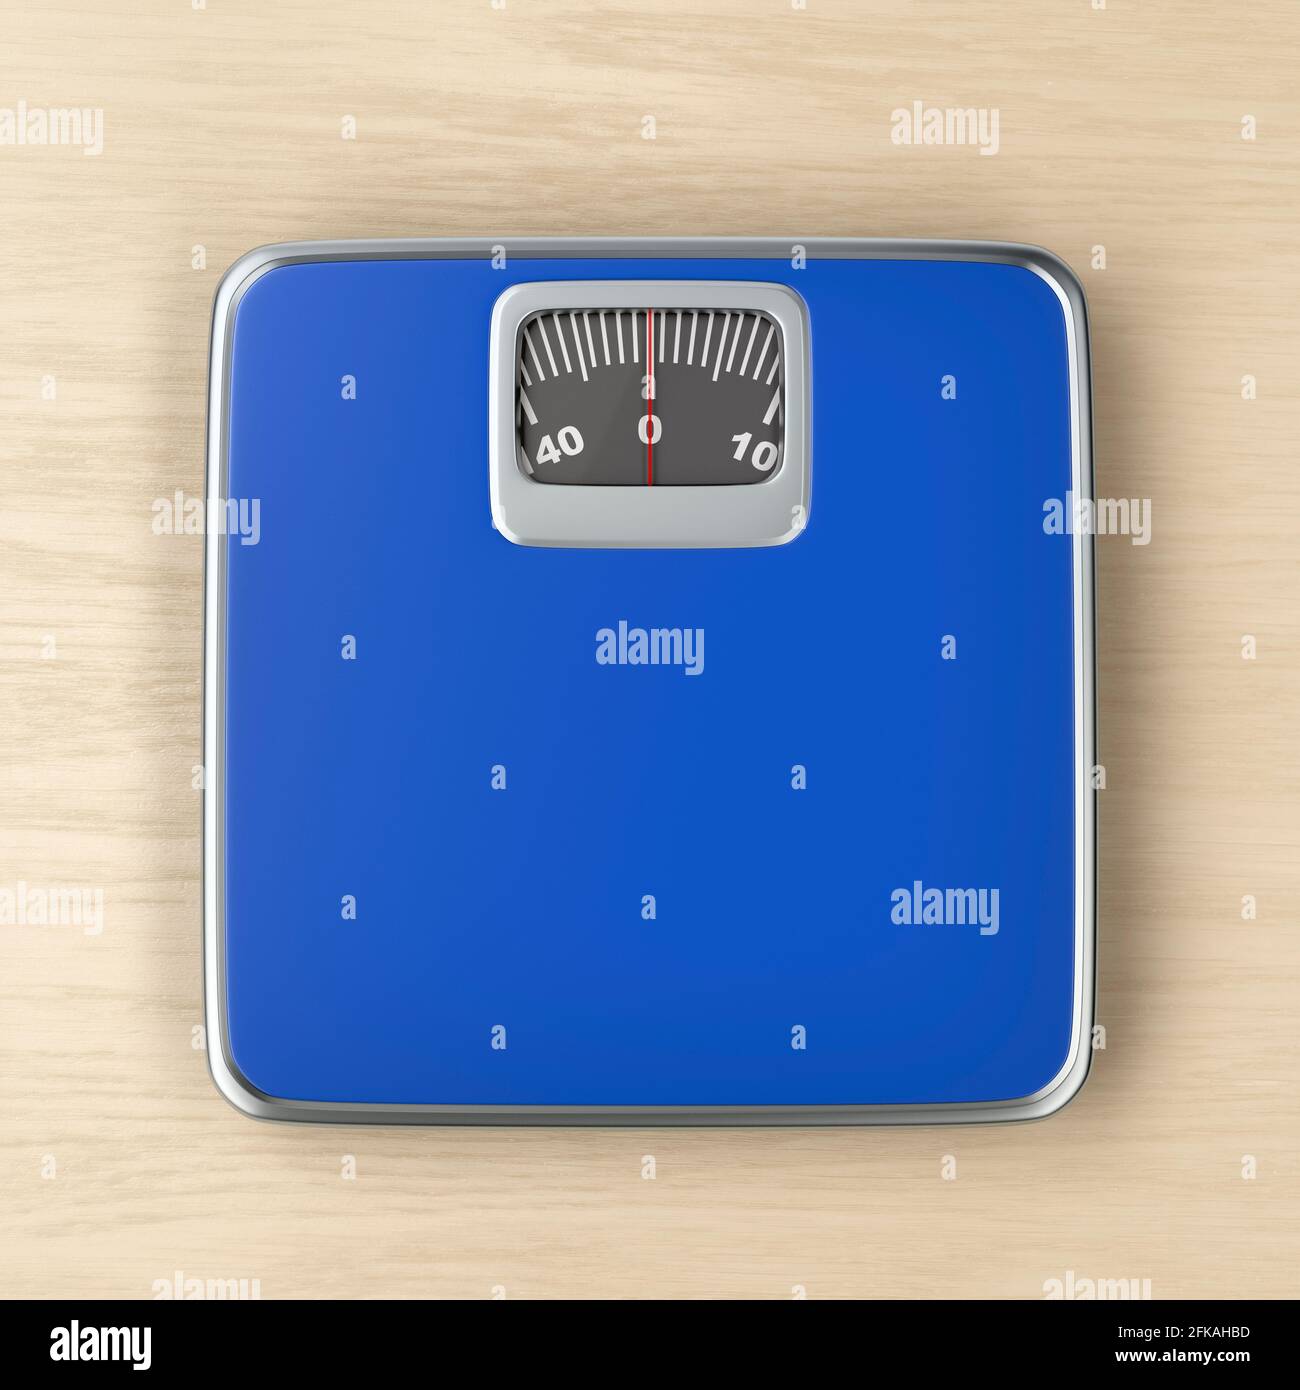 Analog weight scale on the wood floor, top view Stock Photo